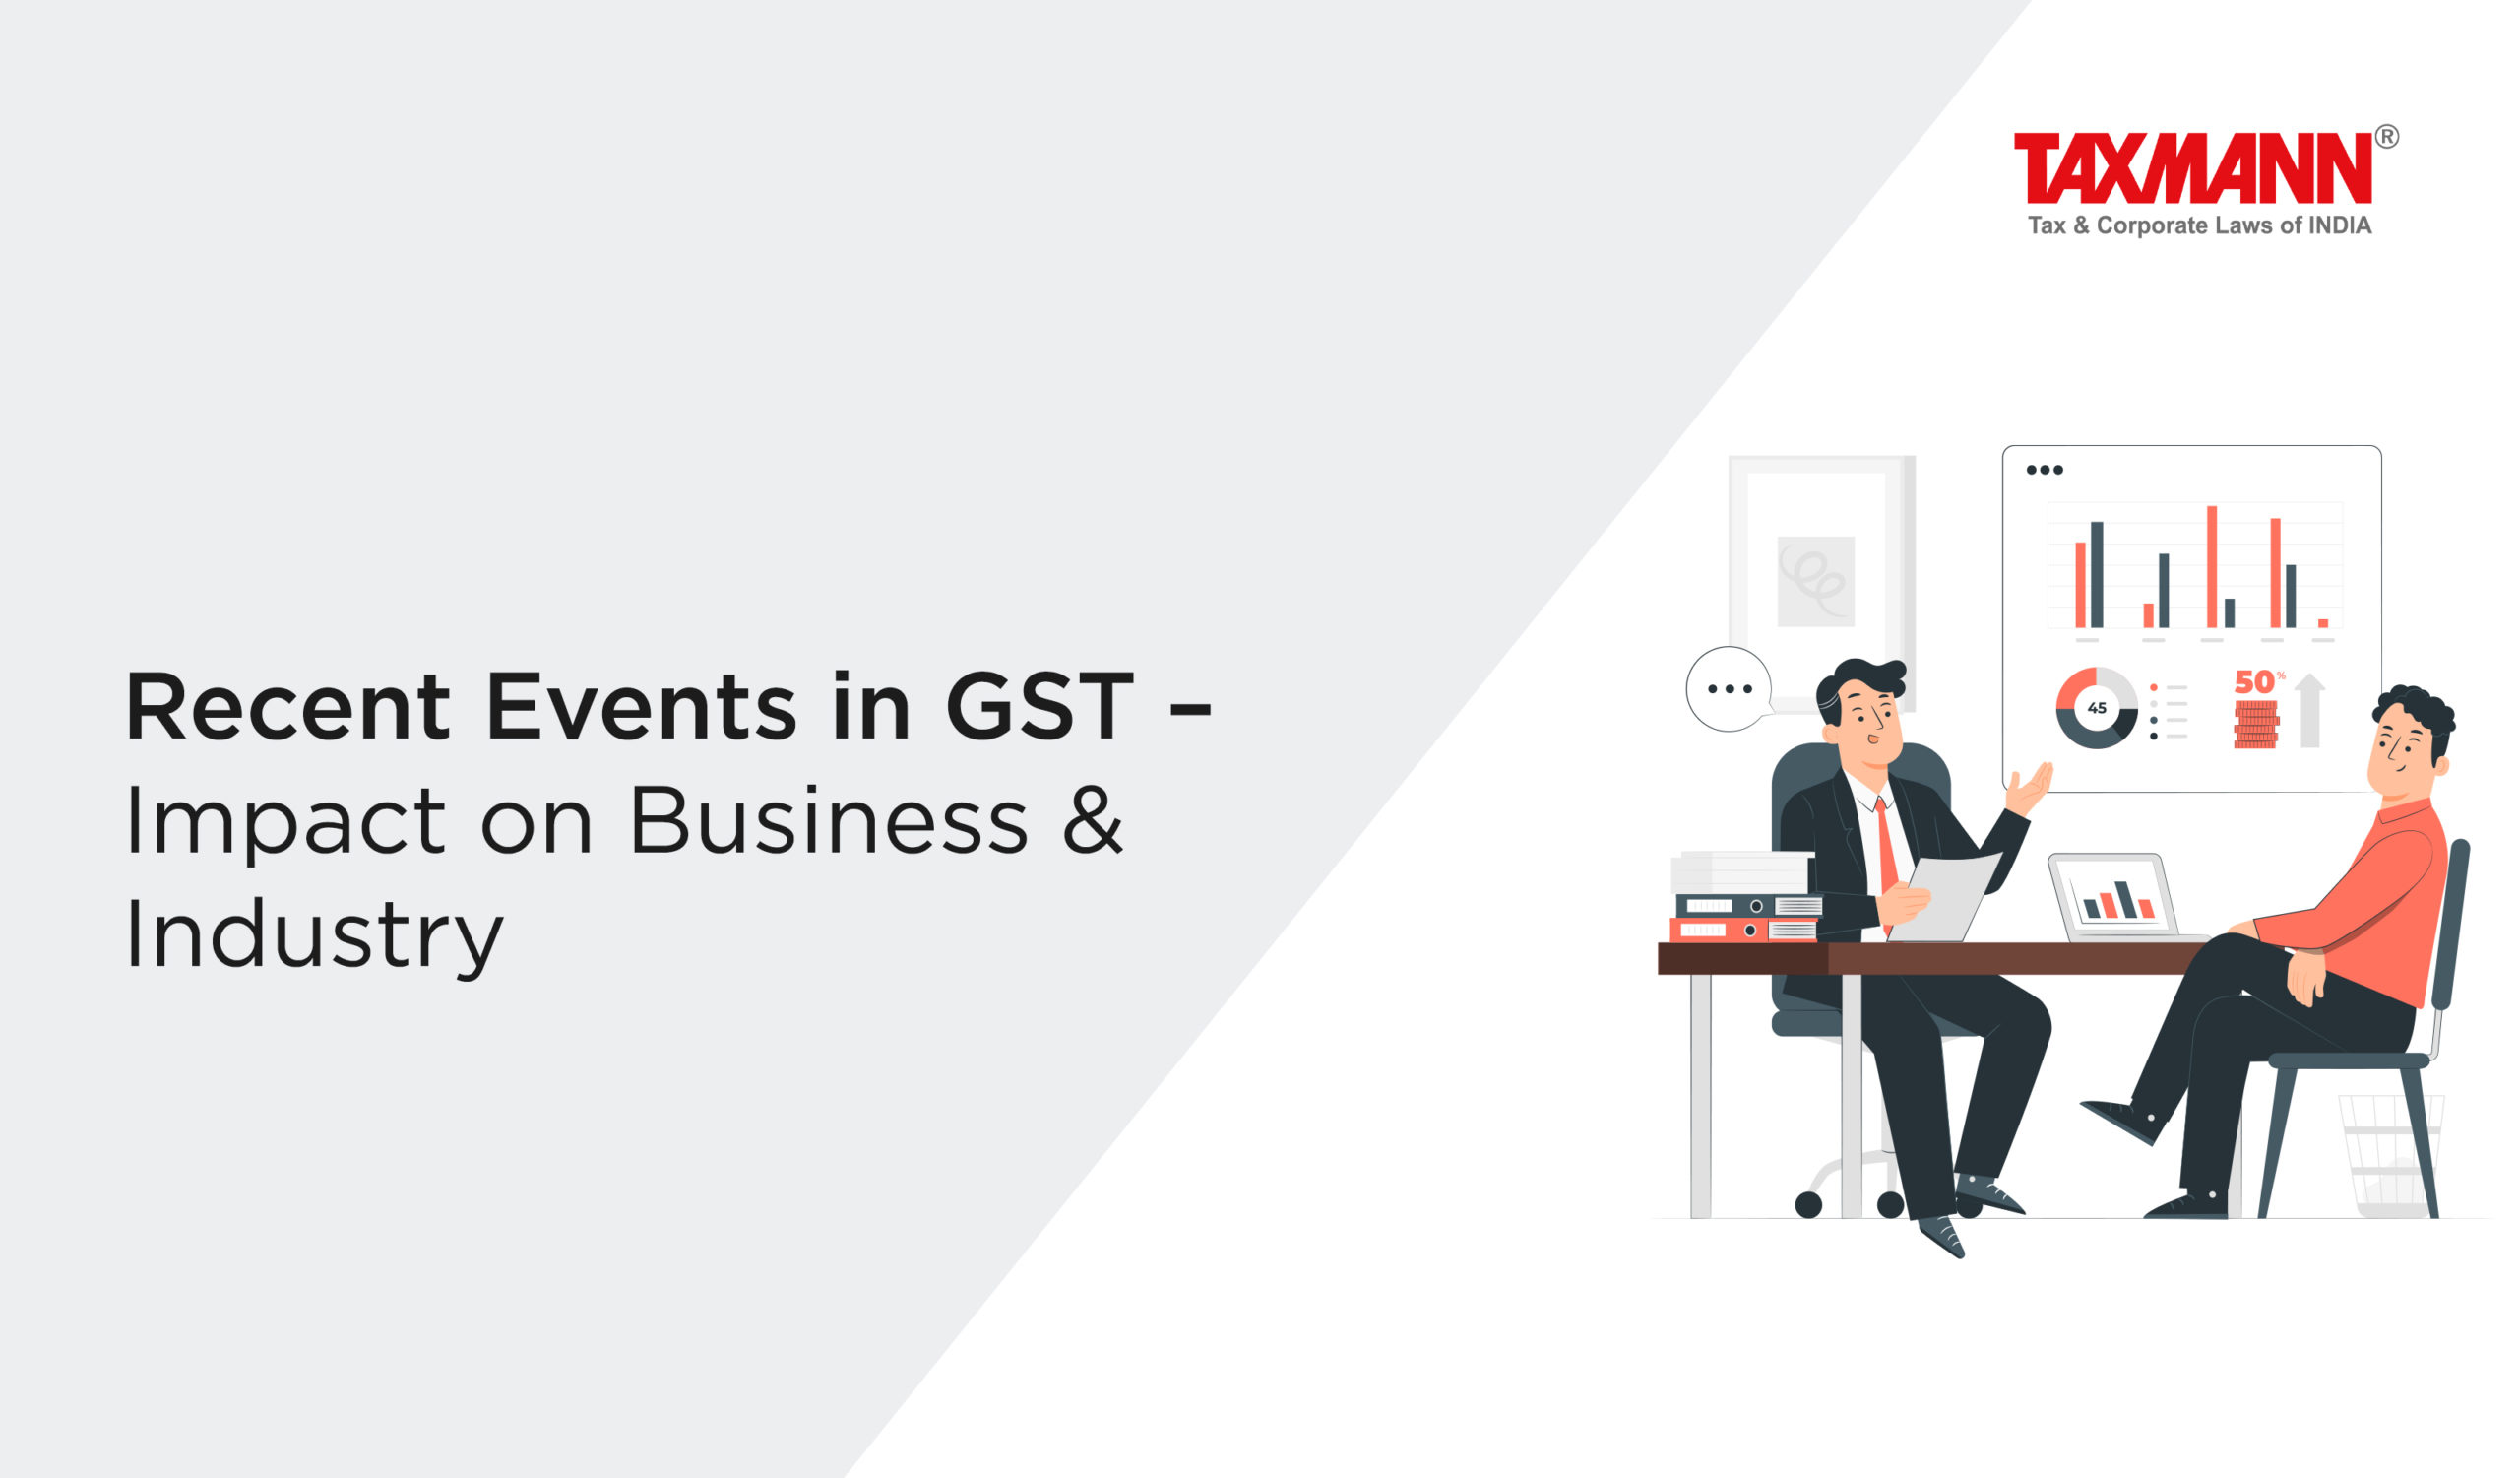 GST impact on Business & Industry